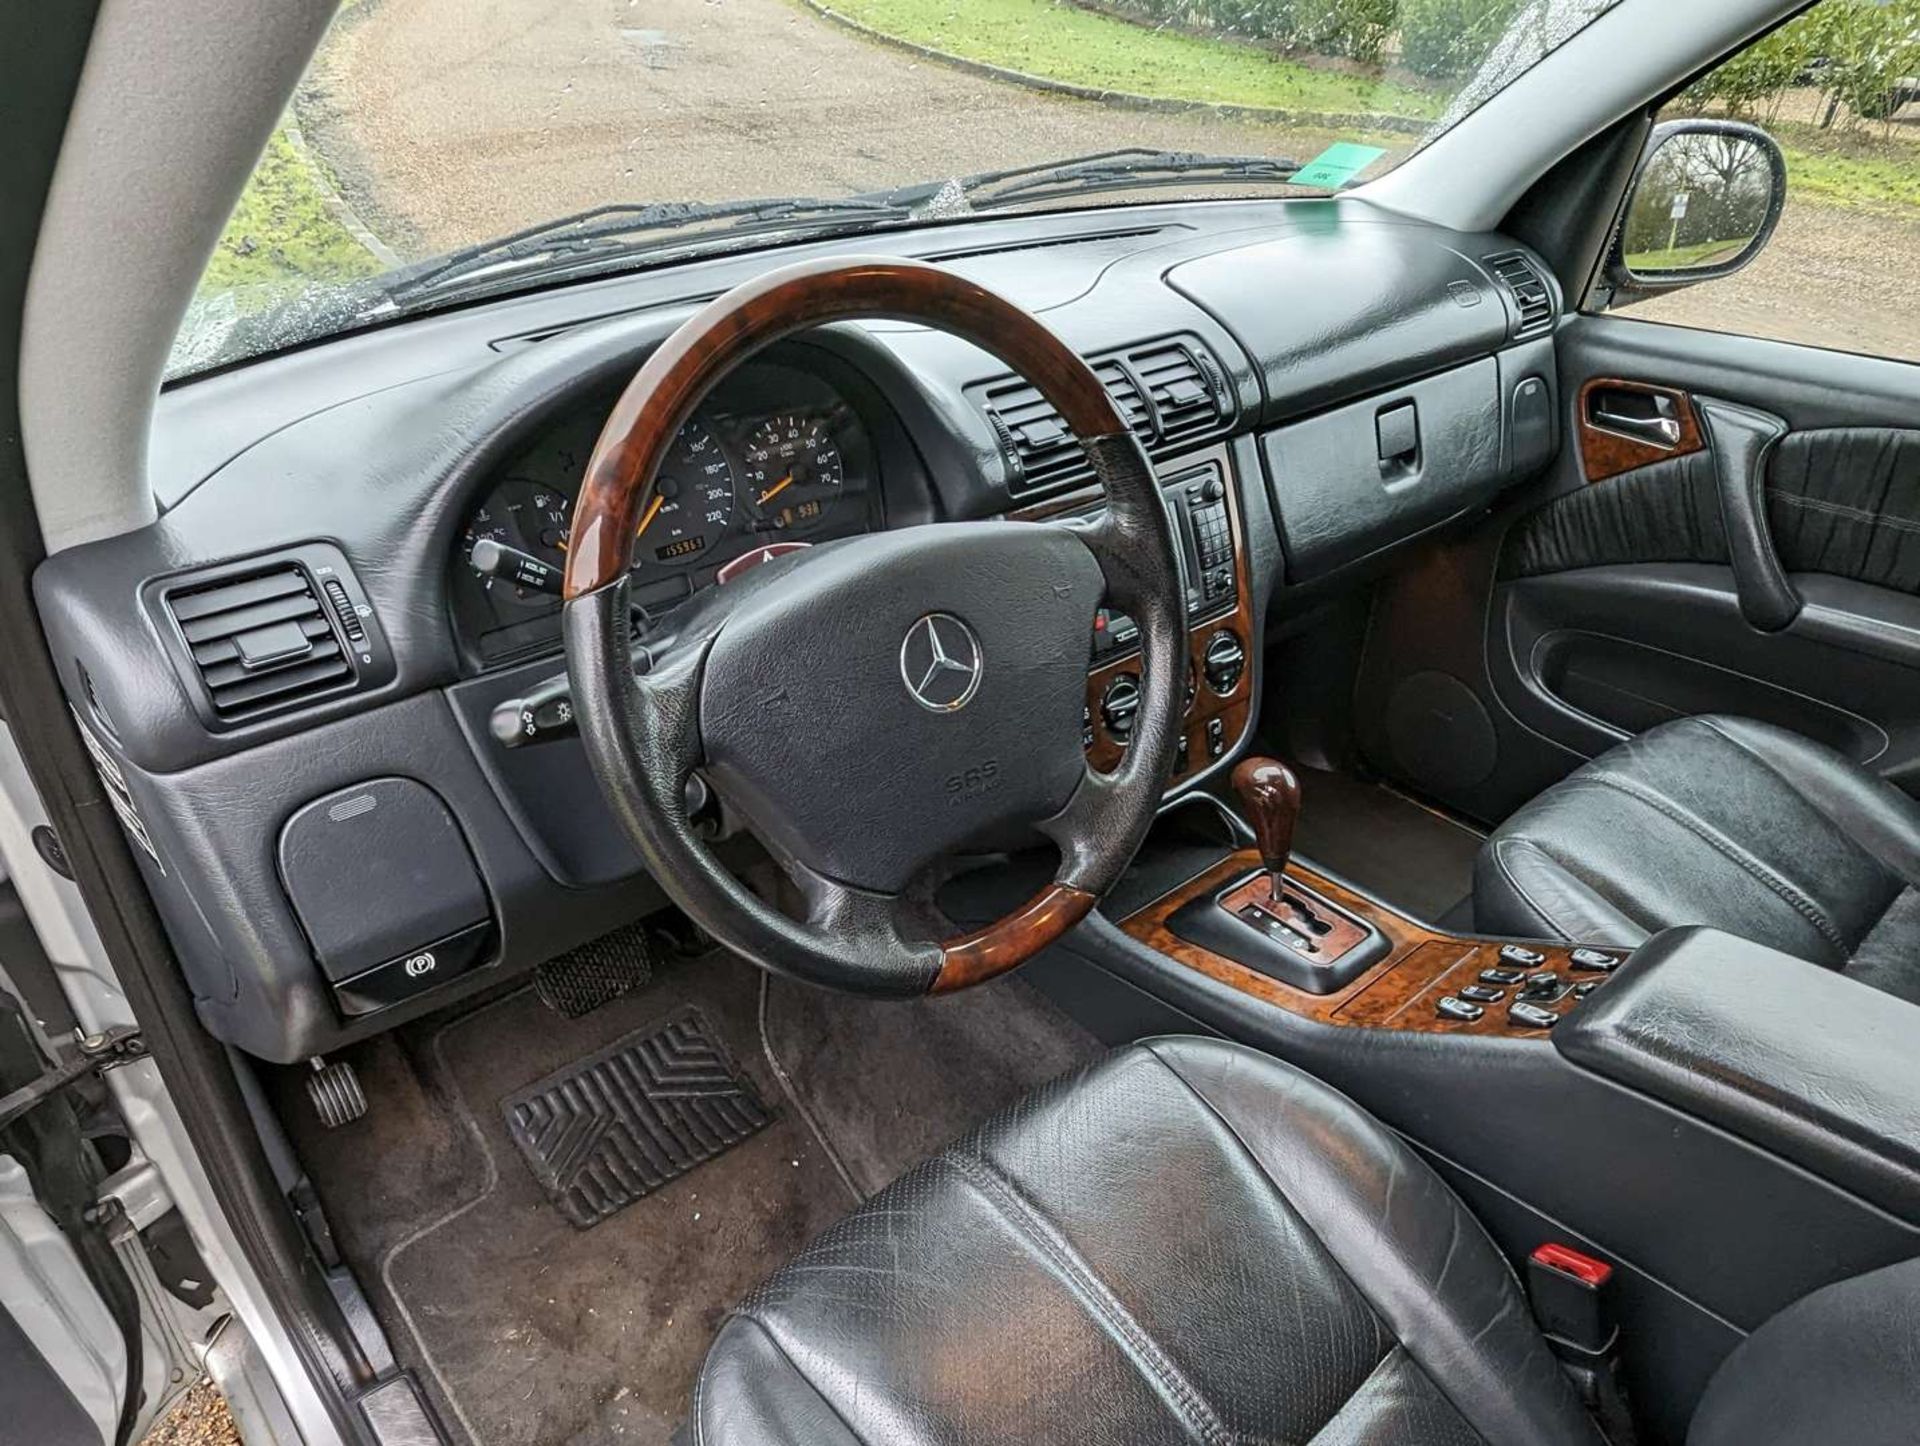 2001 MERCEDES ML 430 LHD - Image 14 of 24